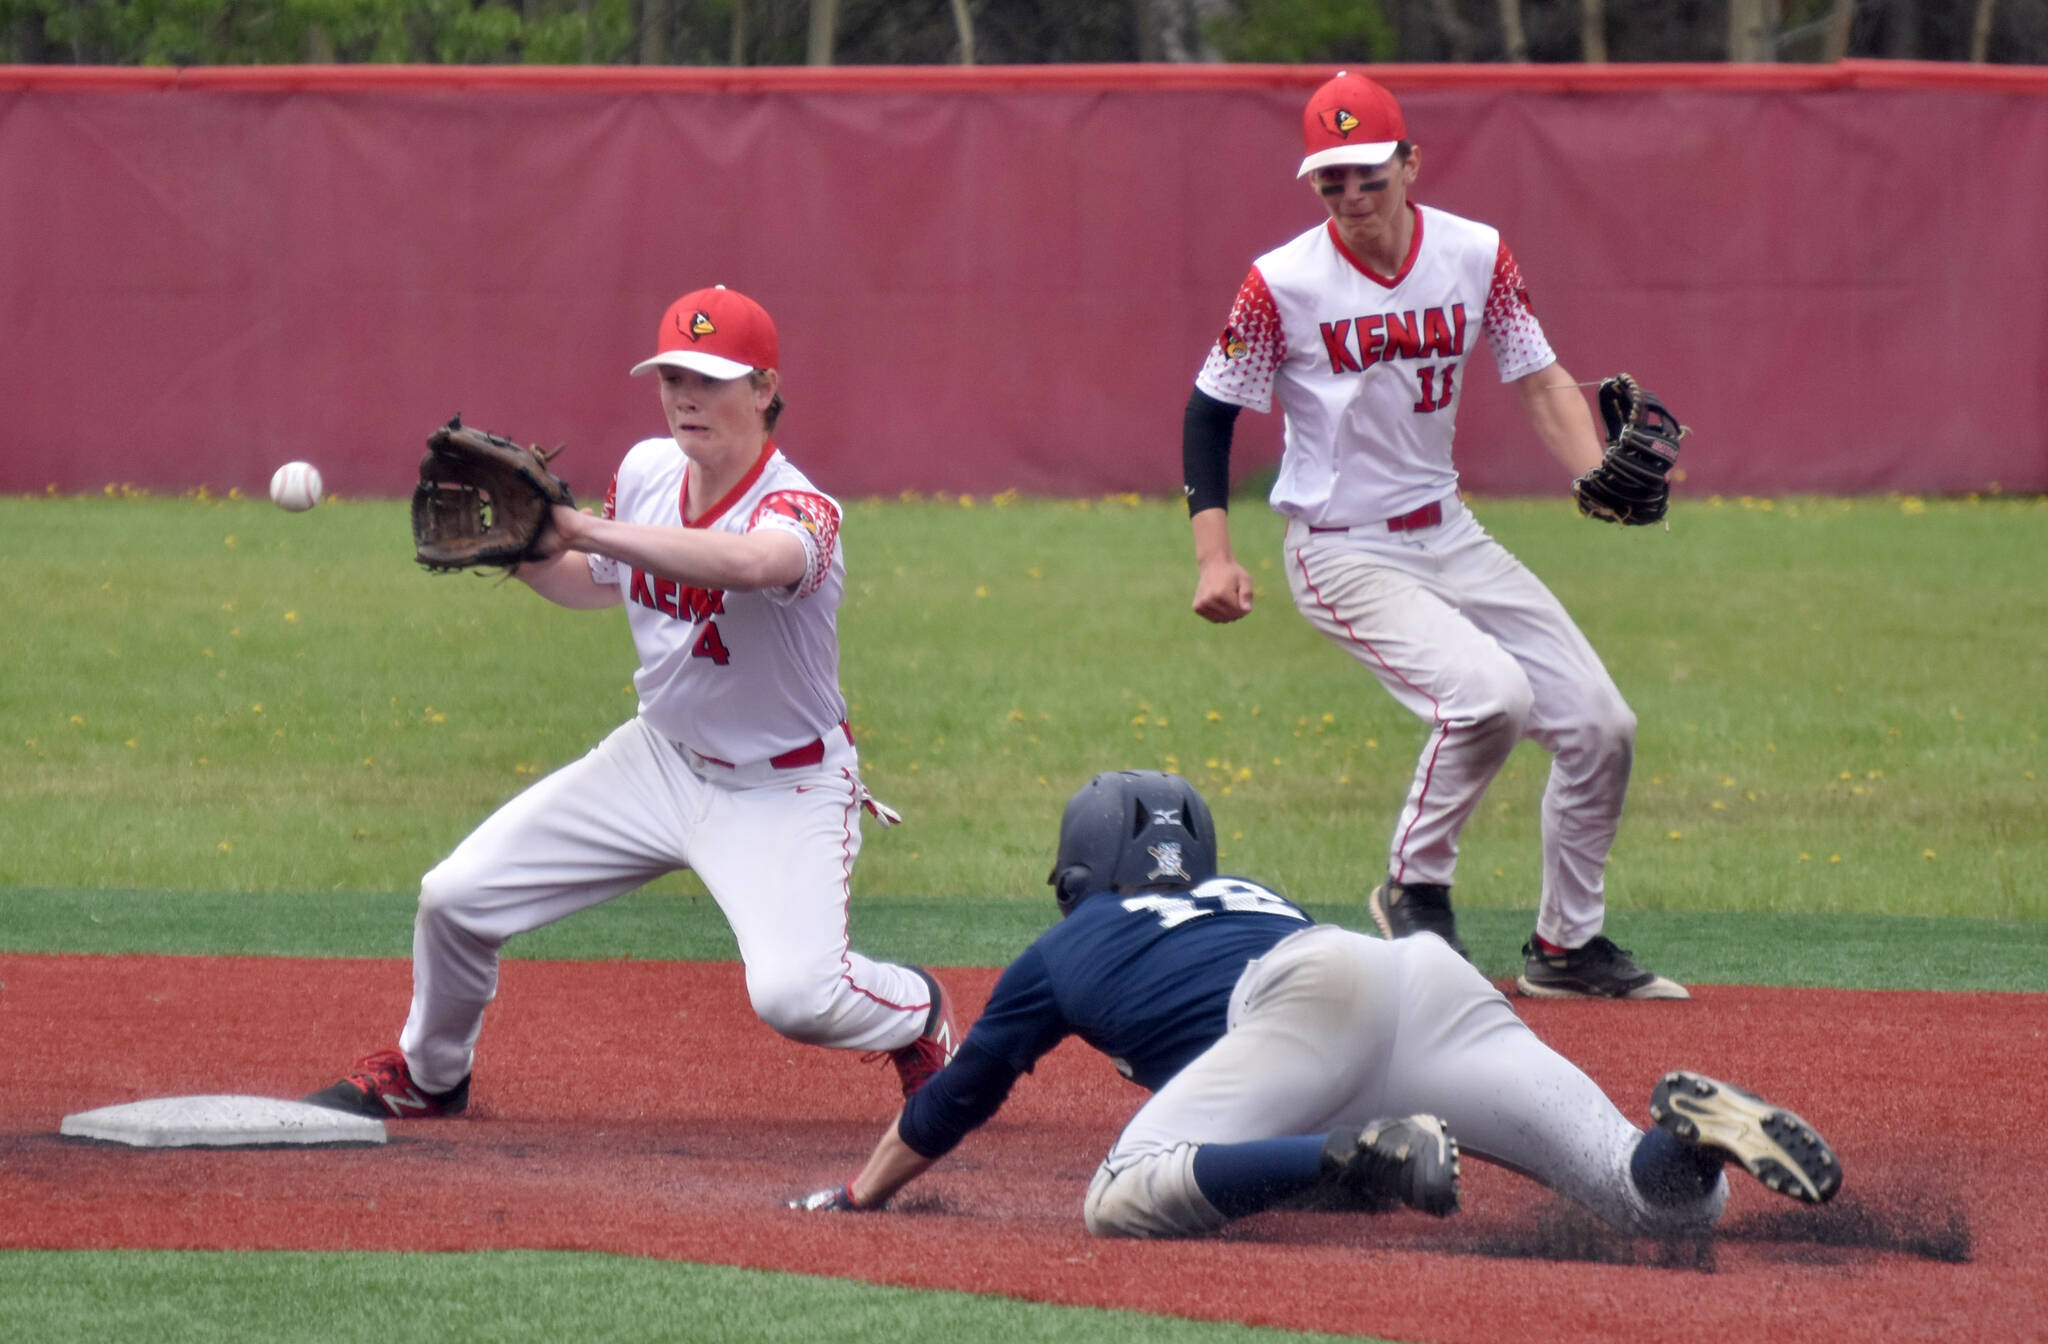 Kenai Central’s Everett Chamberlain gets ready to tag out Soldotna’s Levi Mickelson as Braden Smith backs up in the Division II state championship game Saturday, June 4, 2023, at Wasilla High School in Wasilla, Alaska. (Photo by Jeff Helminiak/Peninsula Clarion)